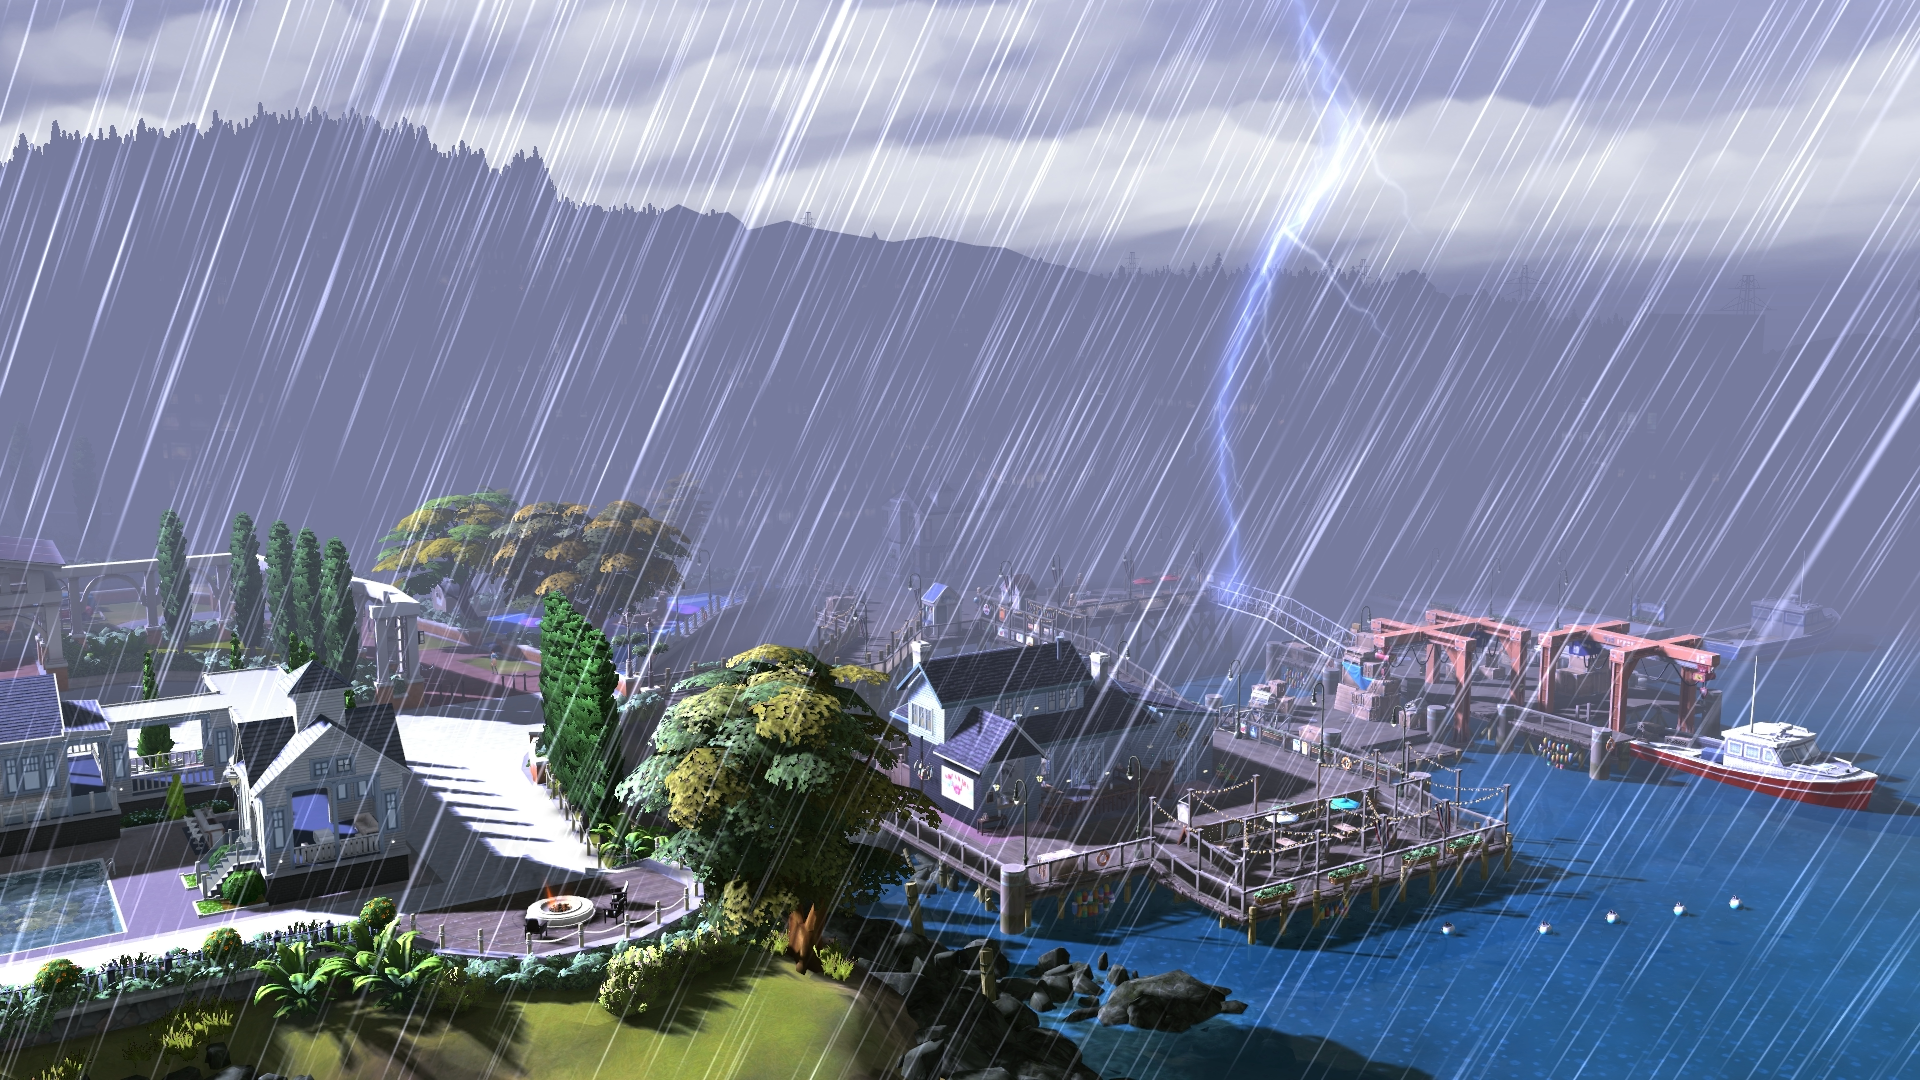 How to change the weather in The Sims 4